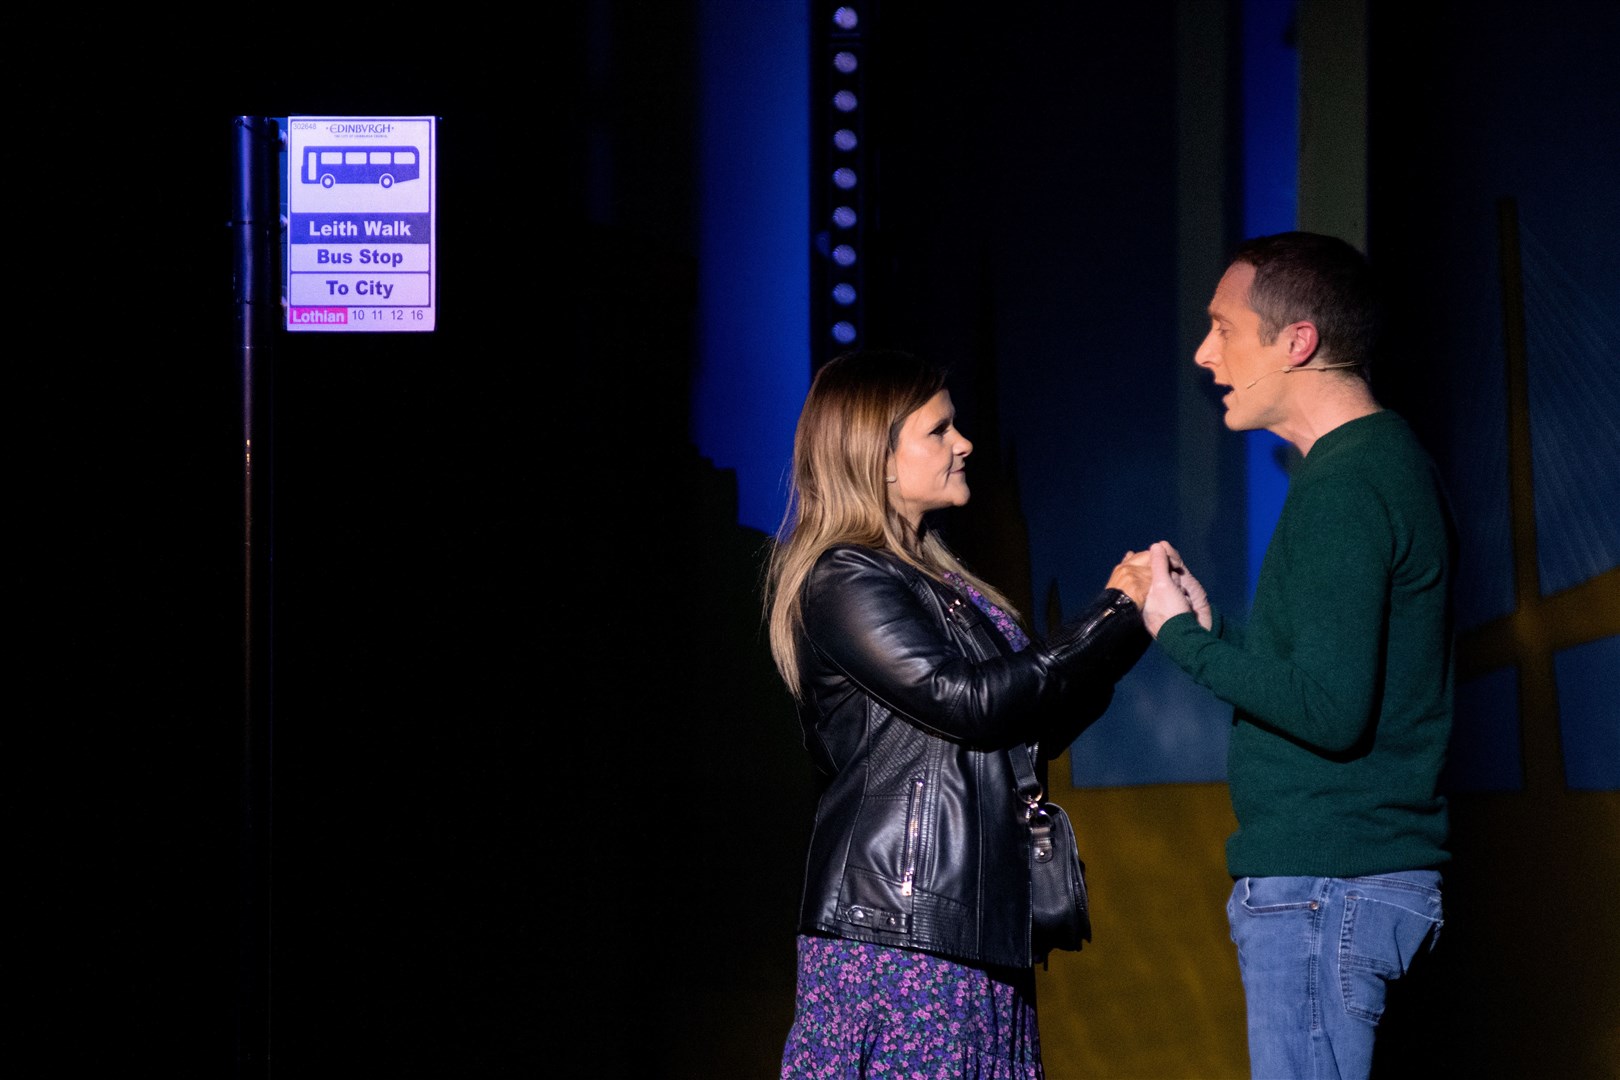 Liz (Natalie Munro) and Ally (Garry Collins) embrace at a bus stop. Picture: Daniel Forsyth